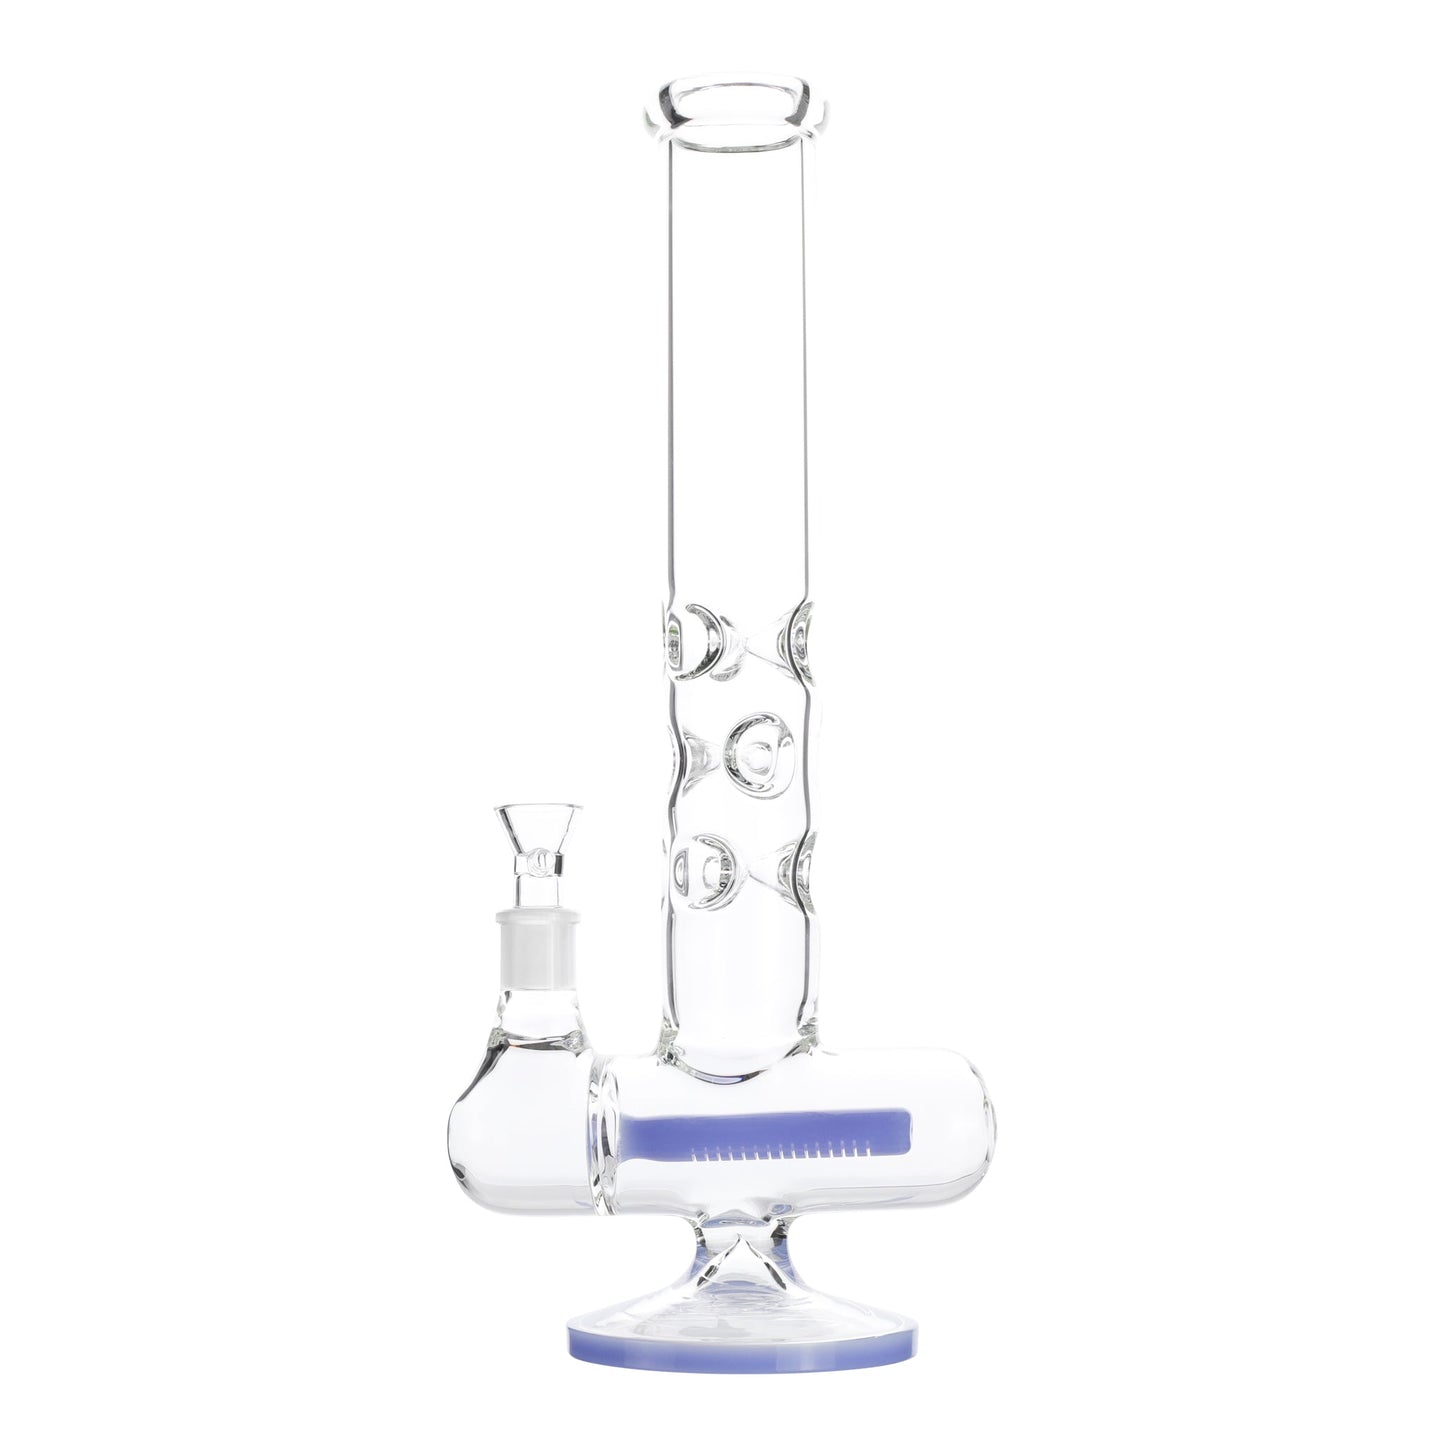 Pinched Inline Perc Bong - 16in